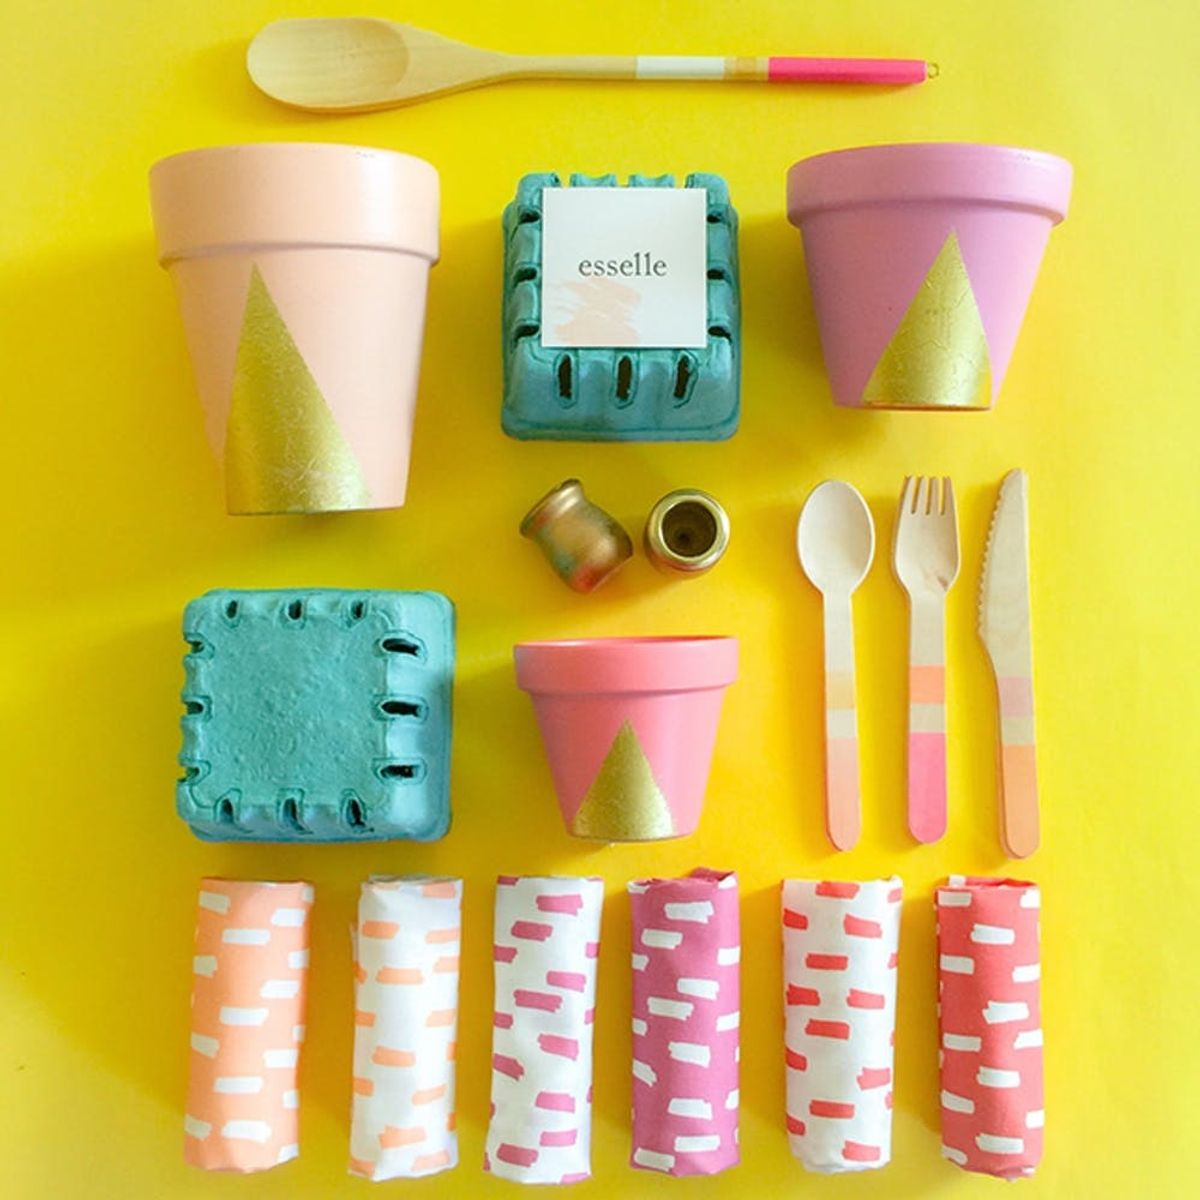 11 Maker-Made Party Essentials Your Shindig Needs